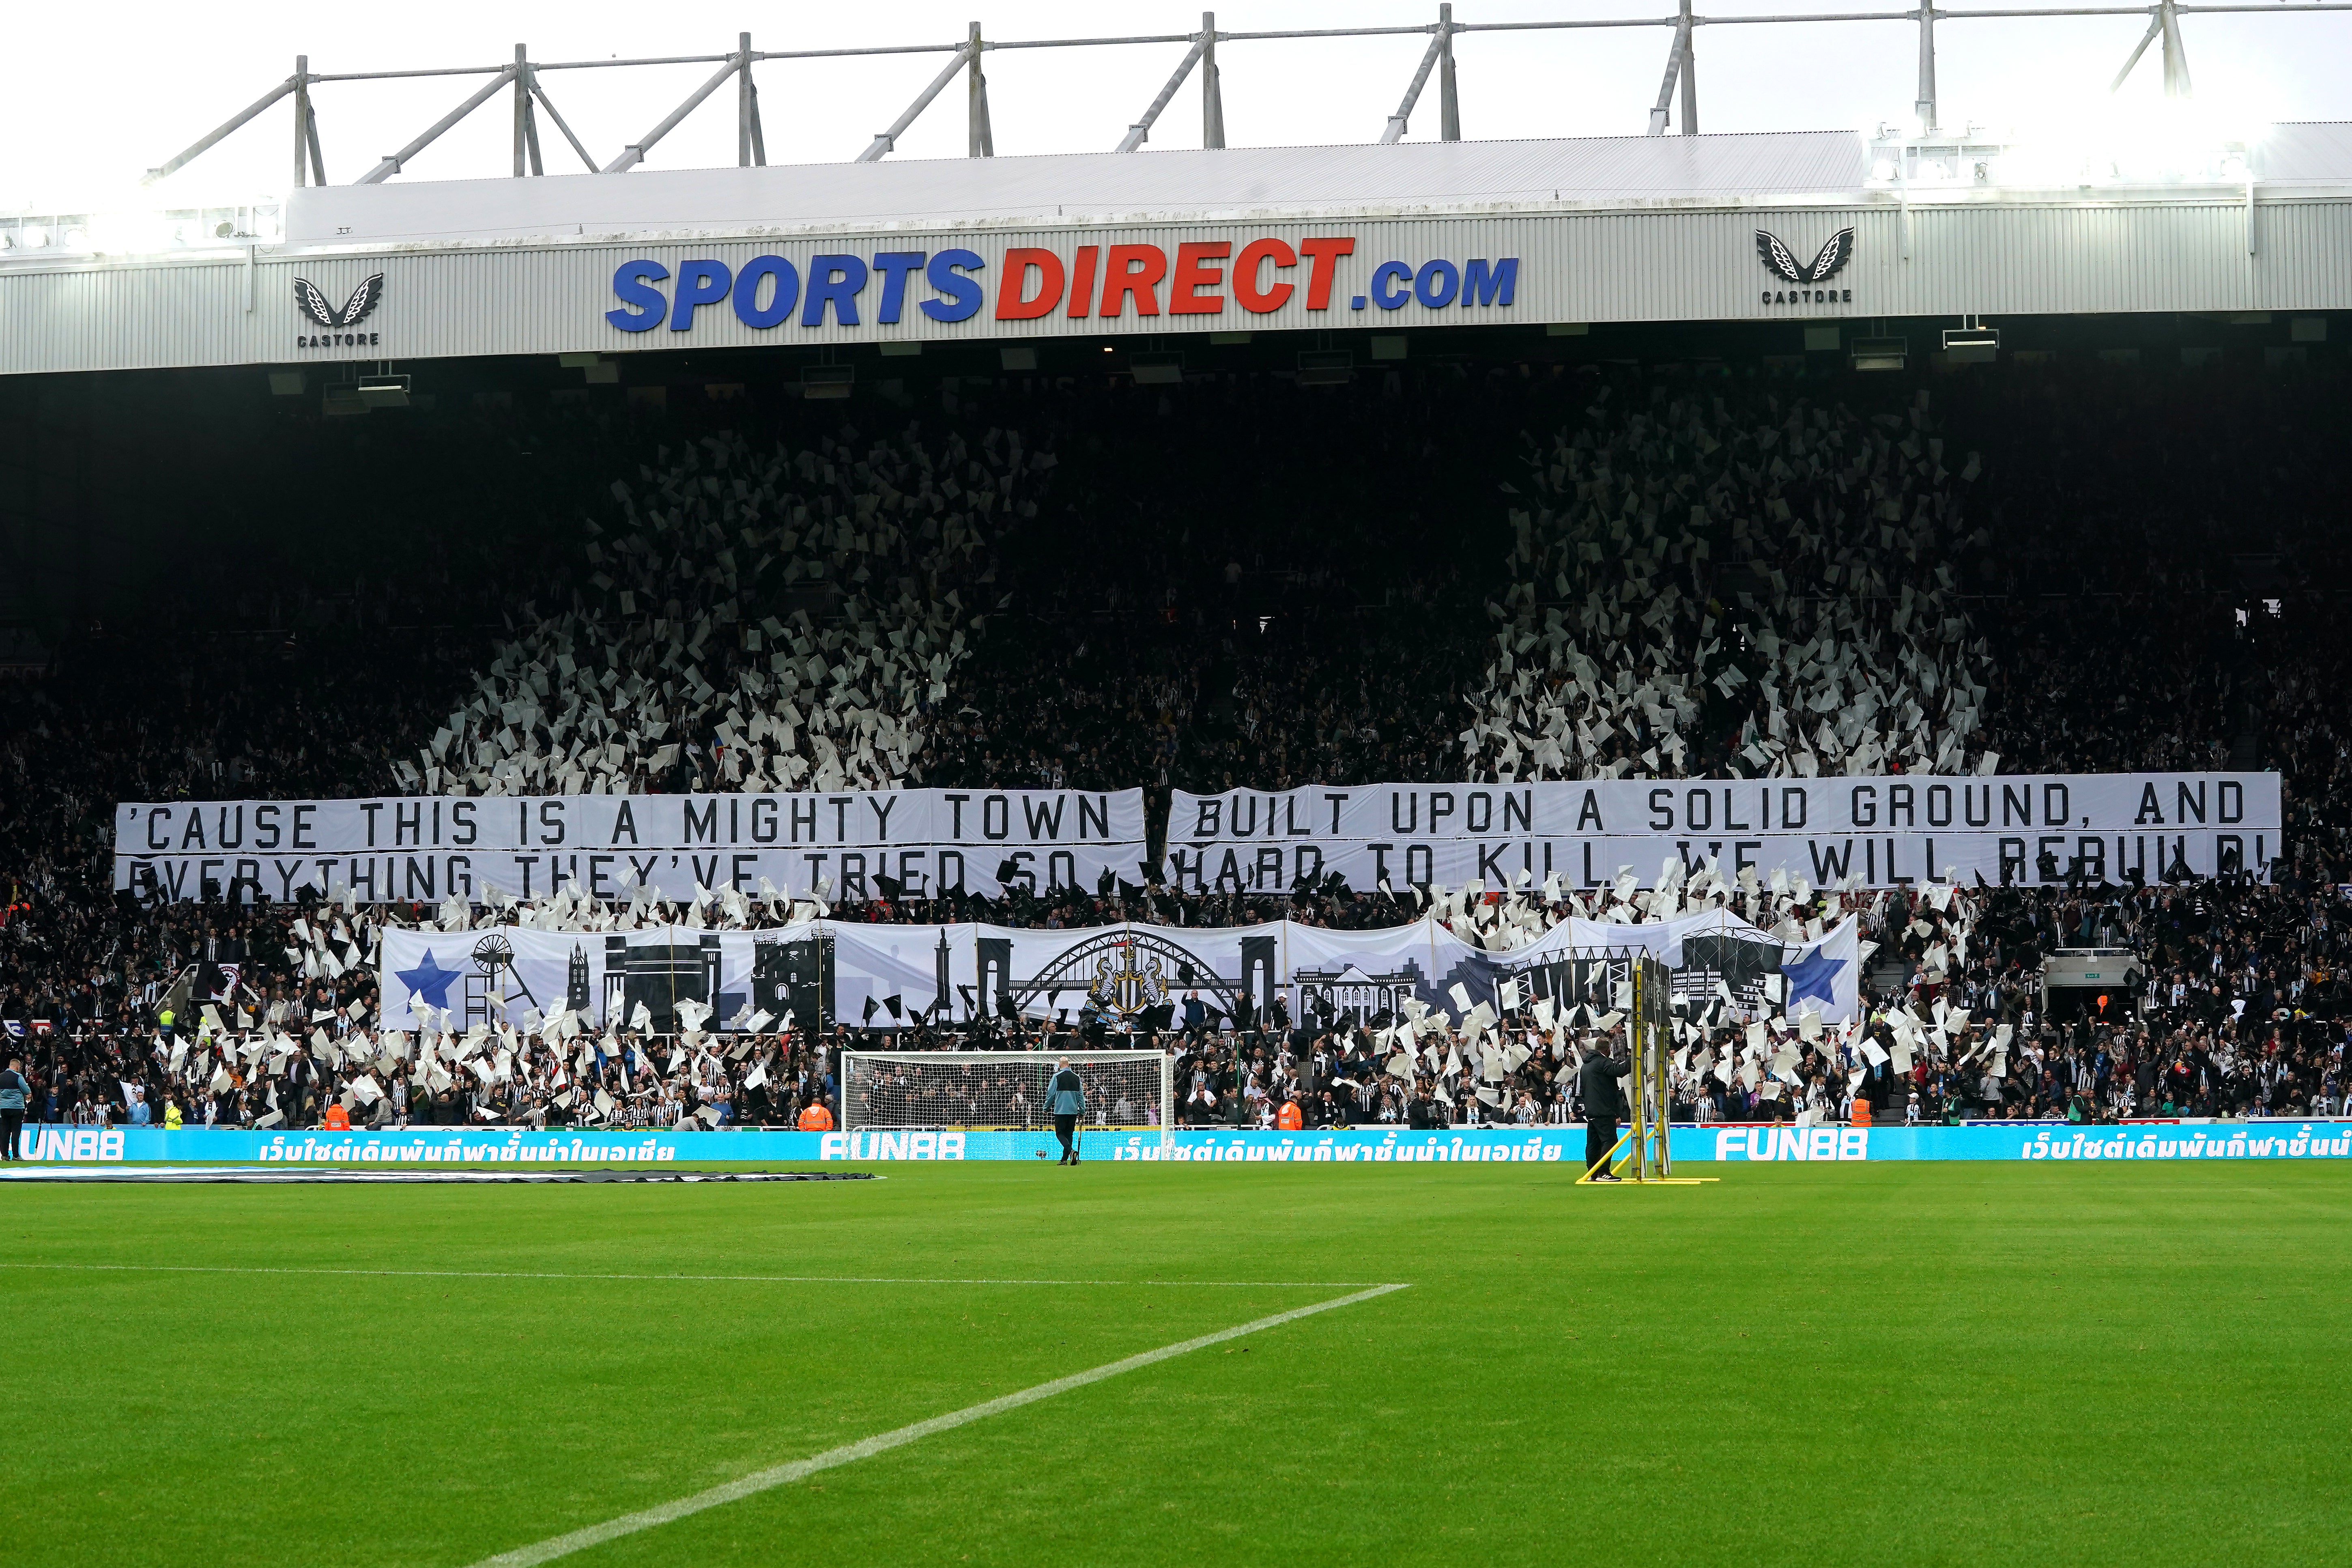 Sports Direct signage remains prominent at St James’ Park (Owen Humphreys/PA)